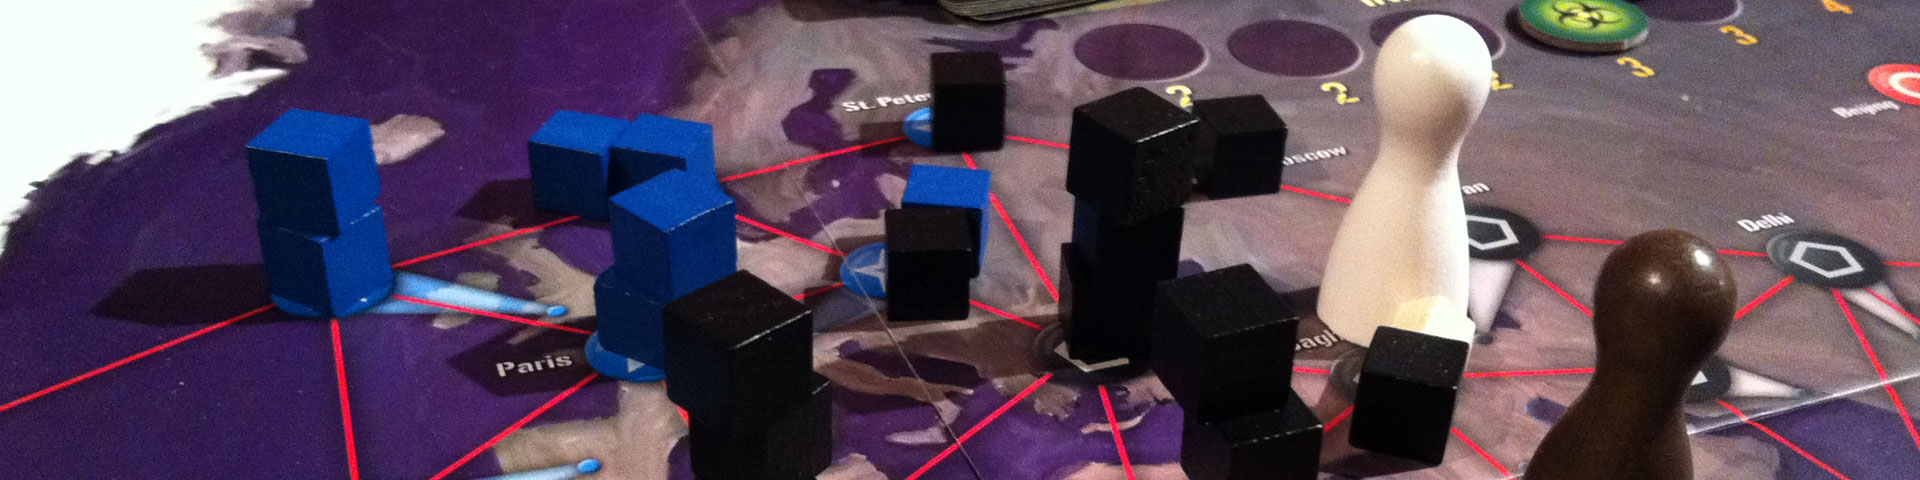 Black and blue cubes -- representing viruses -- are stacked on a map-like game board depicting various cities. A white pawn represents the player character fighting the viruses.